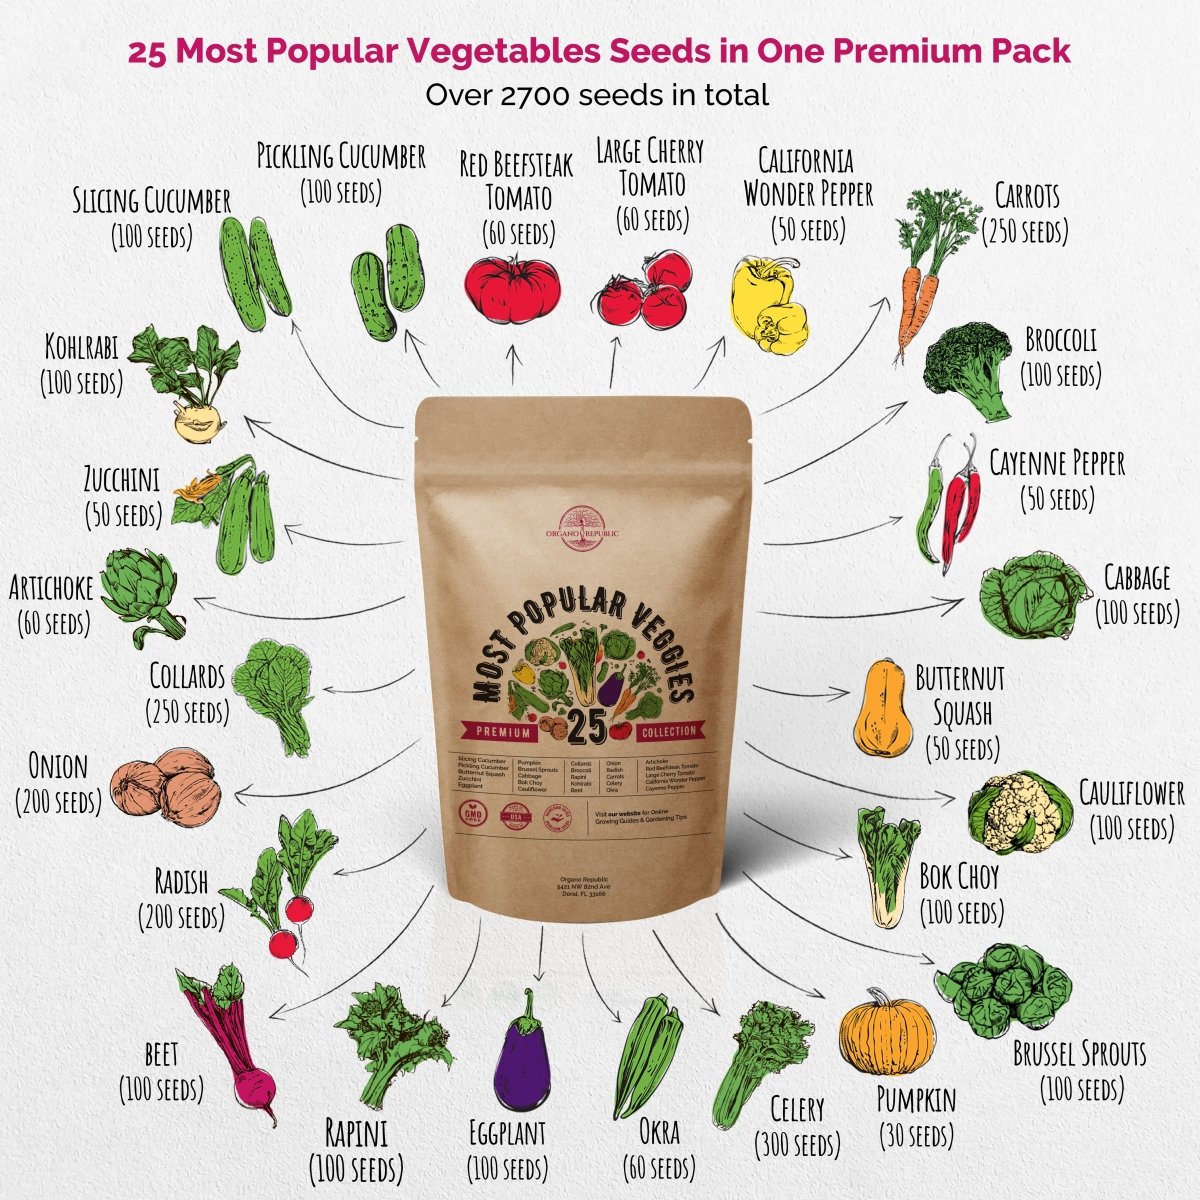 25 Most Popular Vegetables Seeds Variety Pack - Heirloom, Non-GMO, Veggies Seeds for Planting Outdoor and Indoor - Organo Republic